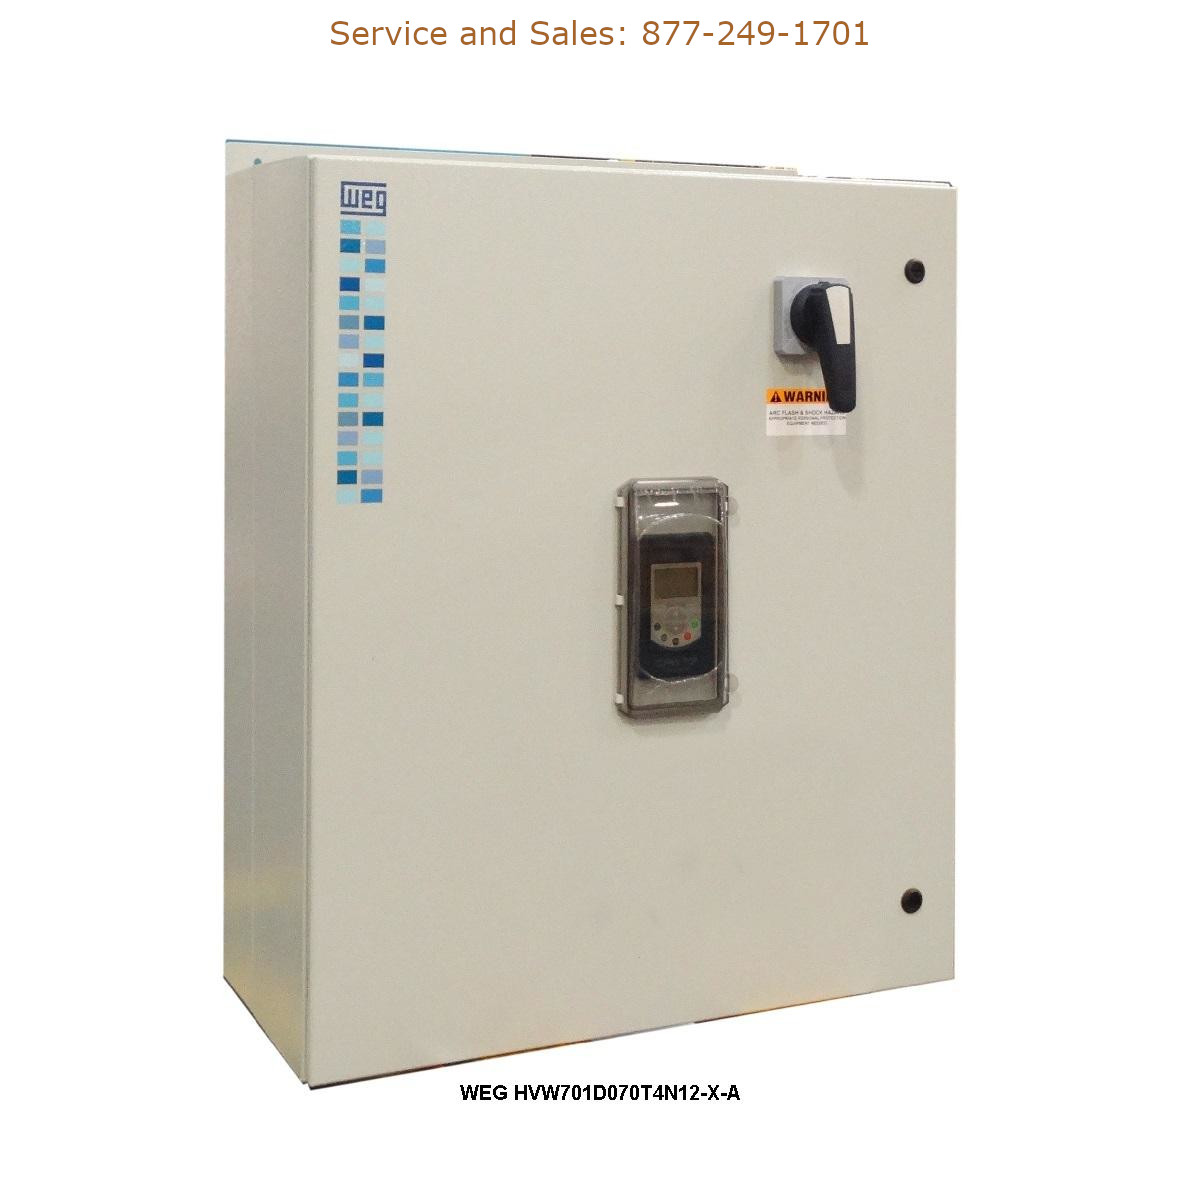 WEG HVW701D070T4N12-X-A WEG Model Number HVW701D070T4N12-X-A WEG Drives, Variable Speed Drives Repair Service, Troubleshooting, Replacement Parts https://gesrepair.com/wp-content/uploads/2022/WEG/WEG_HVW701D070T4N12-X-A_Drives_Variable_Speed_Drives.jpg